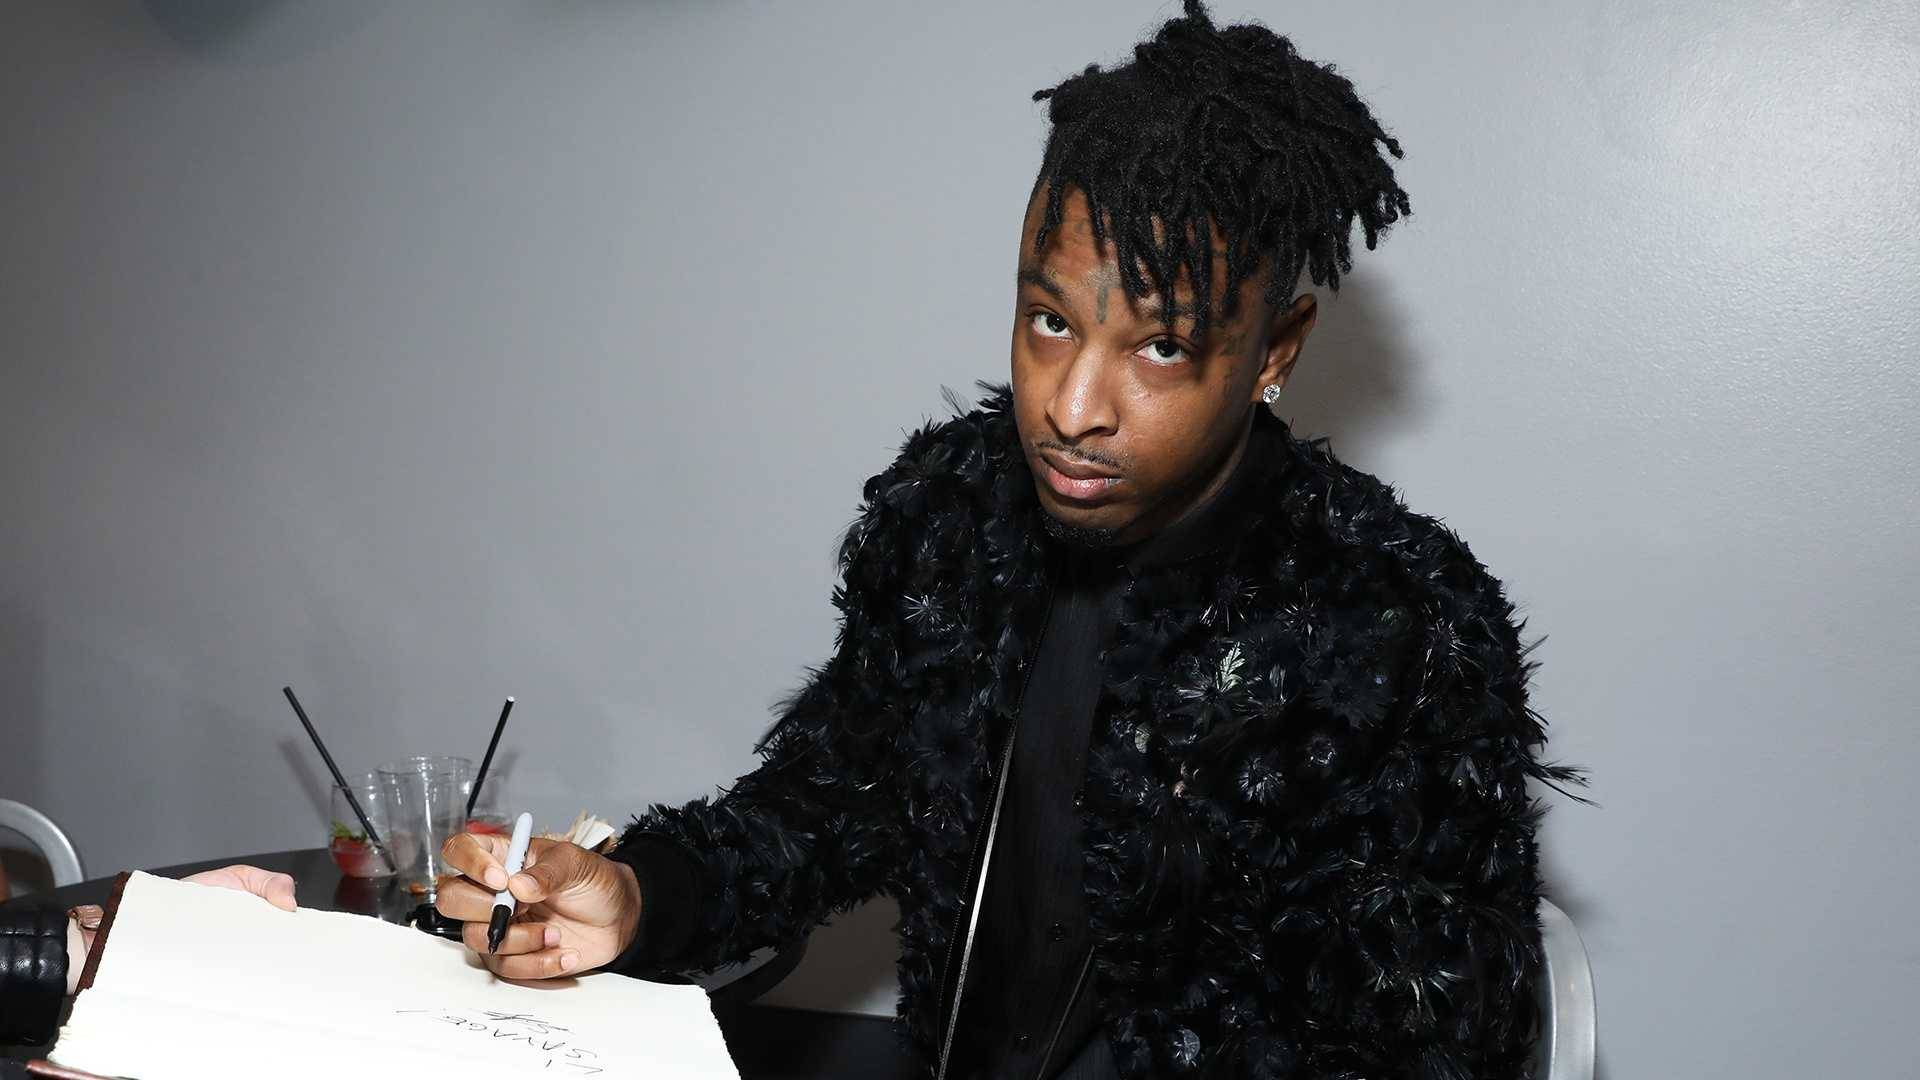 21 Savage Says “It's time” For A New Album - The Source